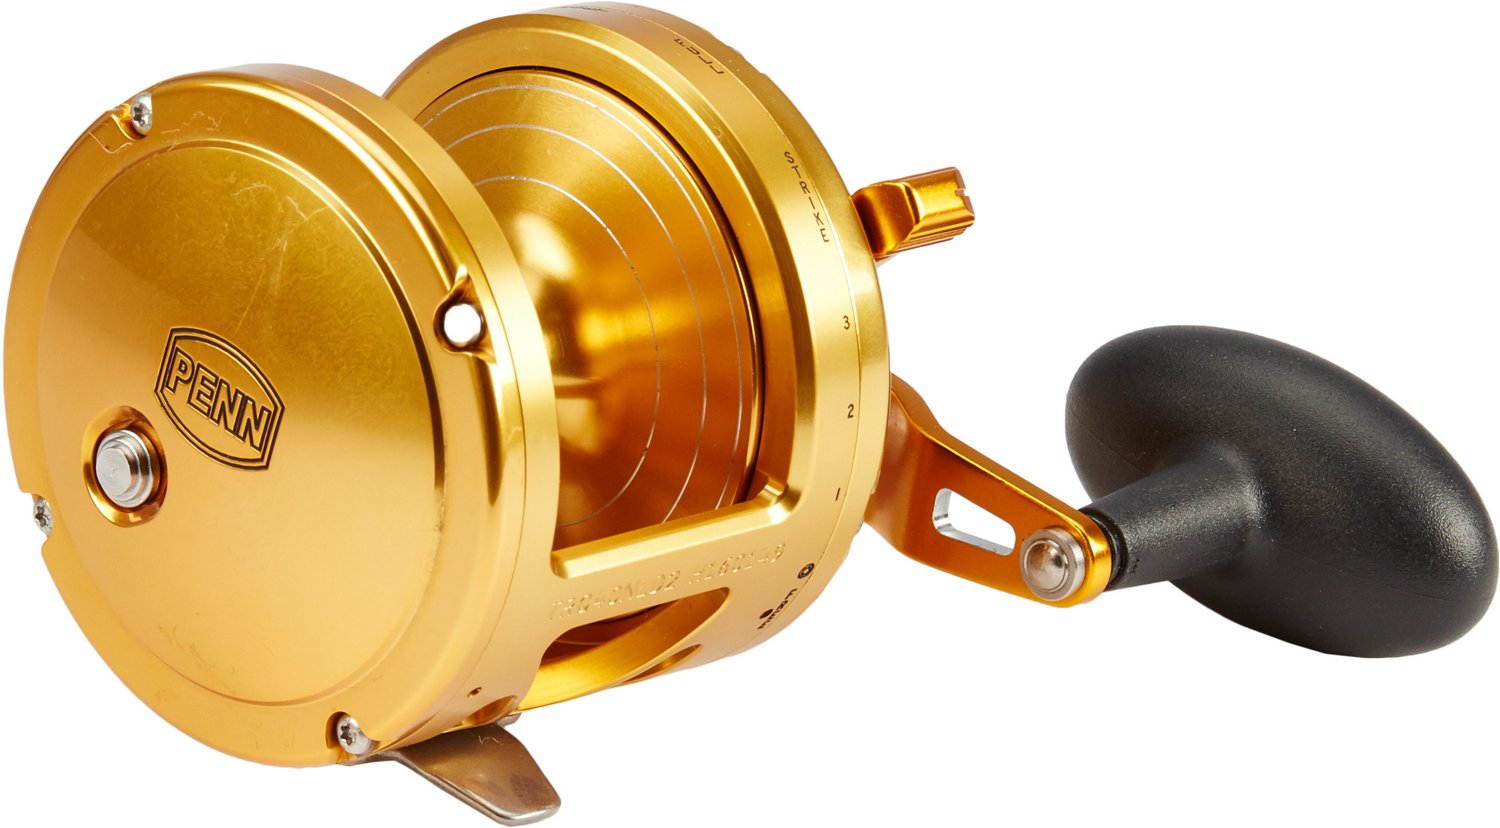 Academy Sports + Outdoors PENN Torque Lever Drag 2-Speed Conventional Reel